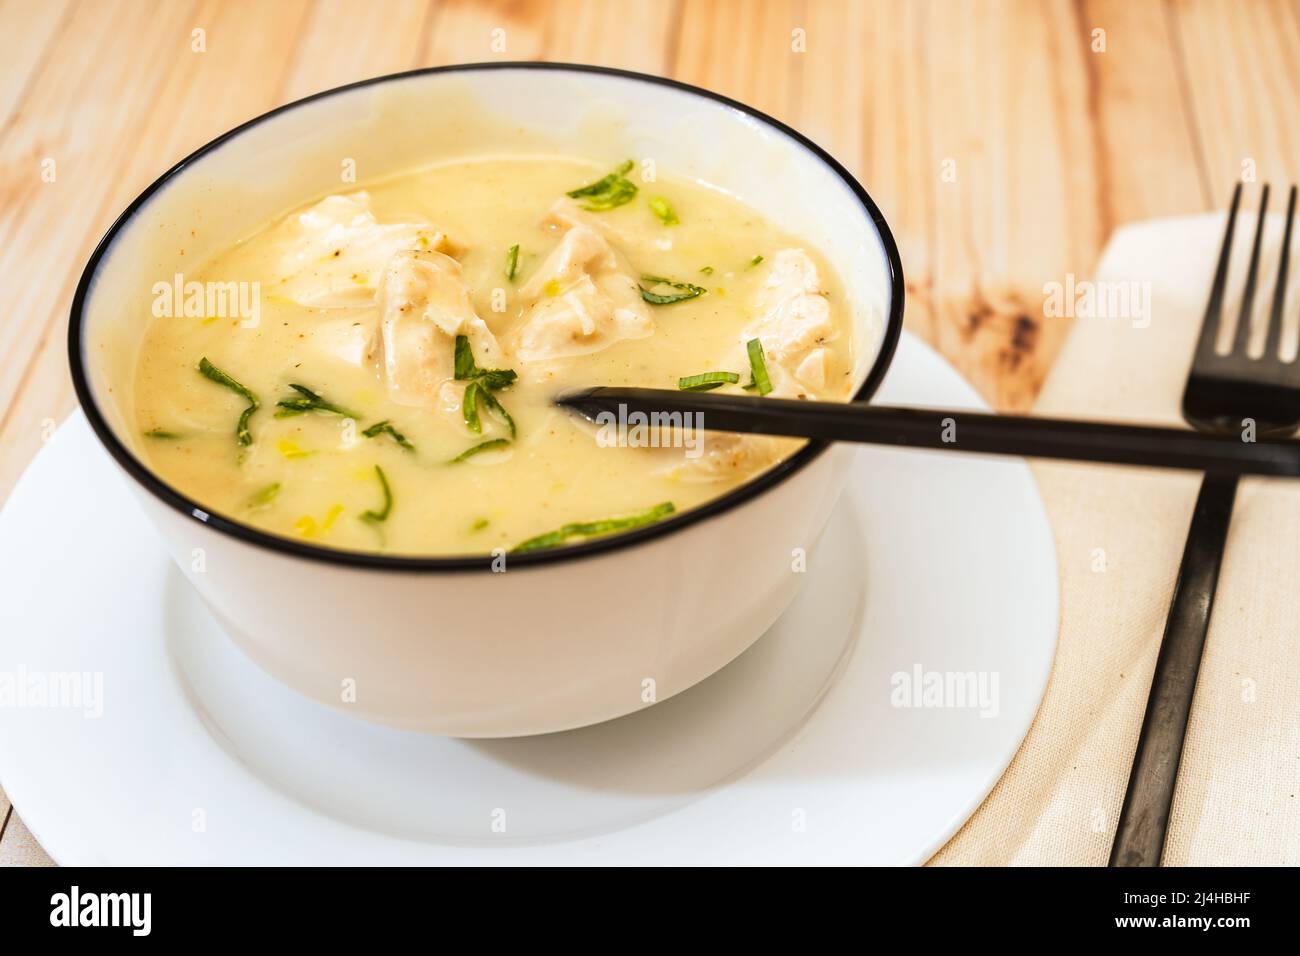 Modern bowl with a traditional homemade cream of poultry soup with chicken pieces, parsley and cream on a rustic or country style wooden table. Natura Stock Photo